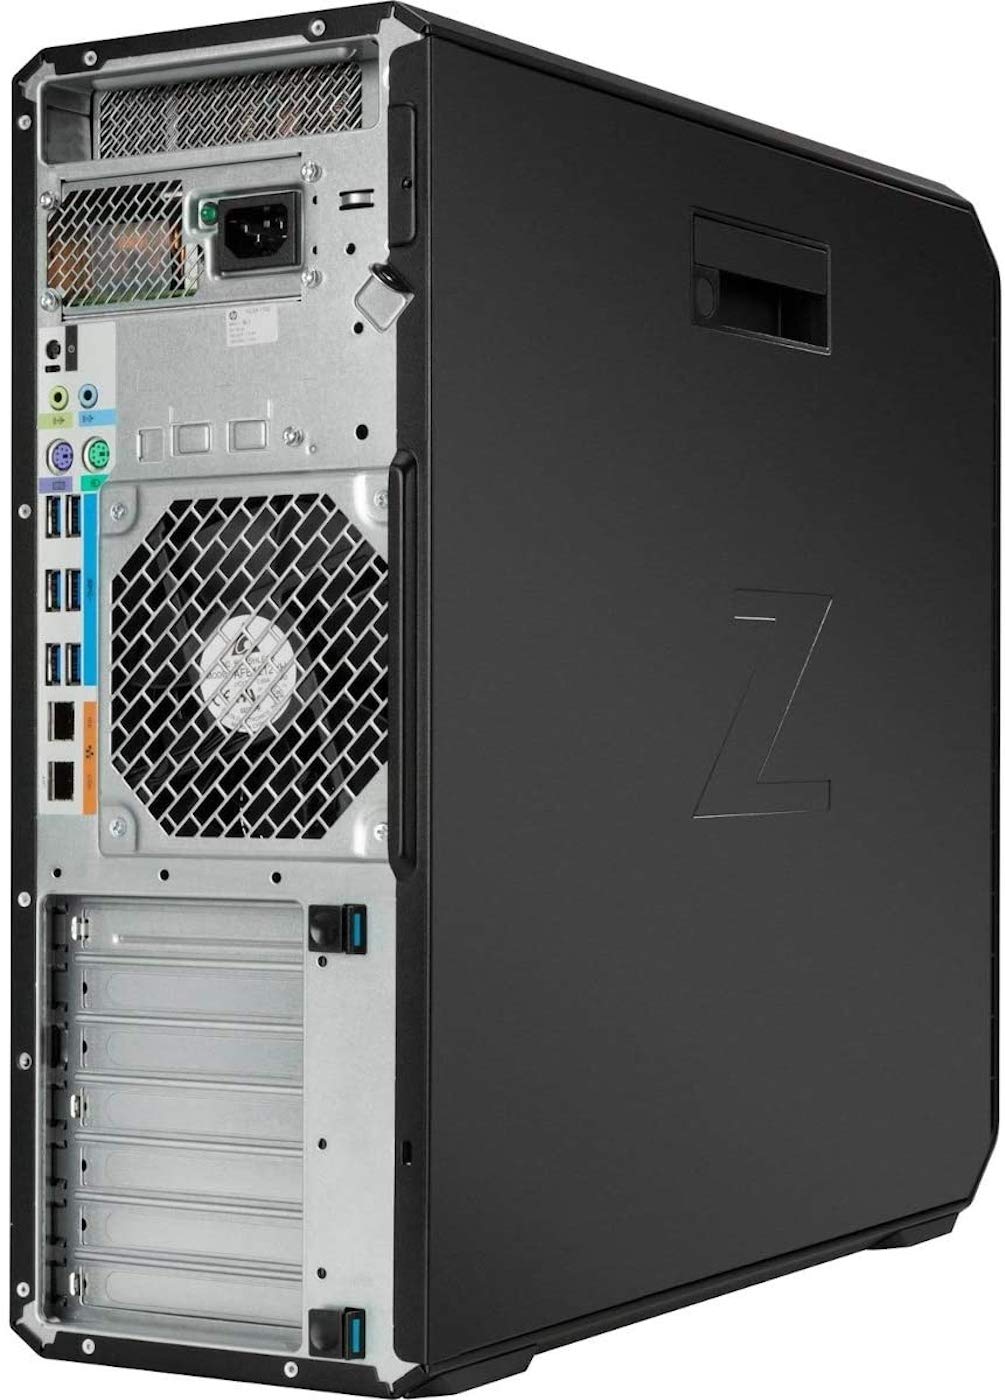 HP Z6 G4 Tower Workstation PC, Intel Xeon Silver 4108 (8-Core) up to 3.0GHz, 64GB DDR4 RAM, 1TB NVMe M.2 SSD + 2TB HDD, Nvidia Quadro P400 2GB (4K Support), Windows 10 Professional (Renewed)